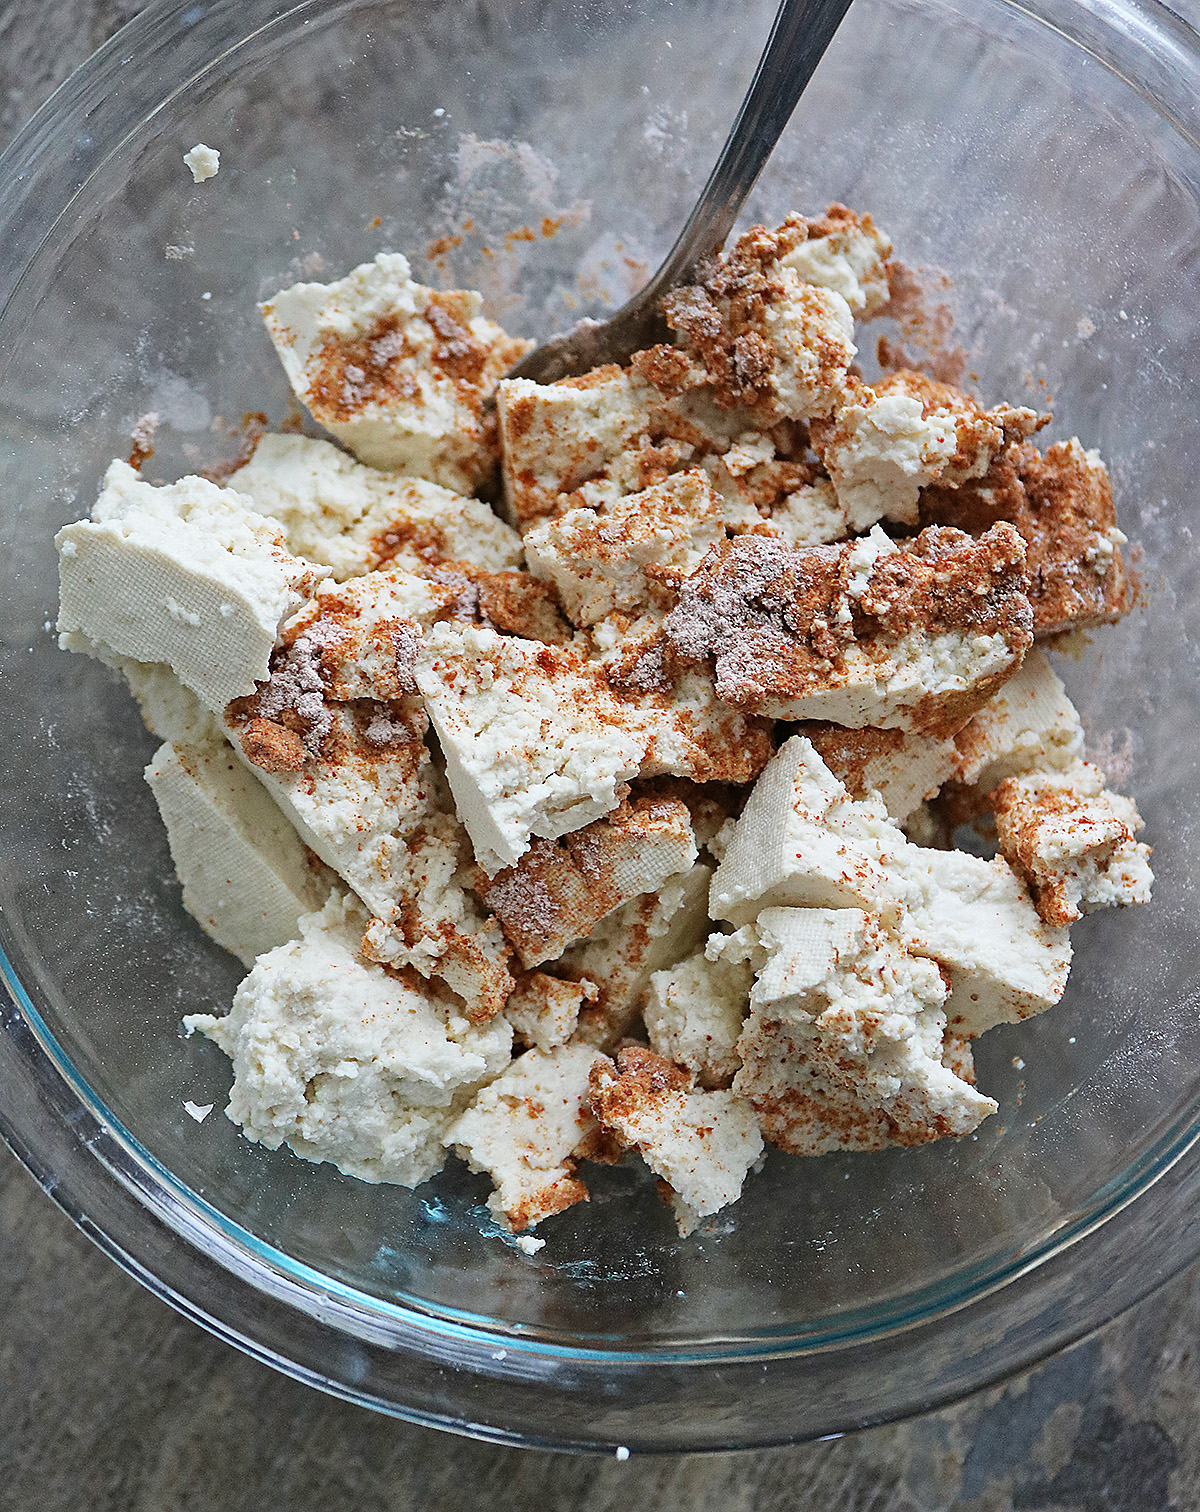 Mixing tofu with arrowroot spice mix